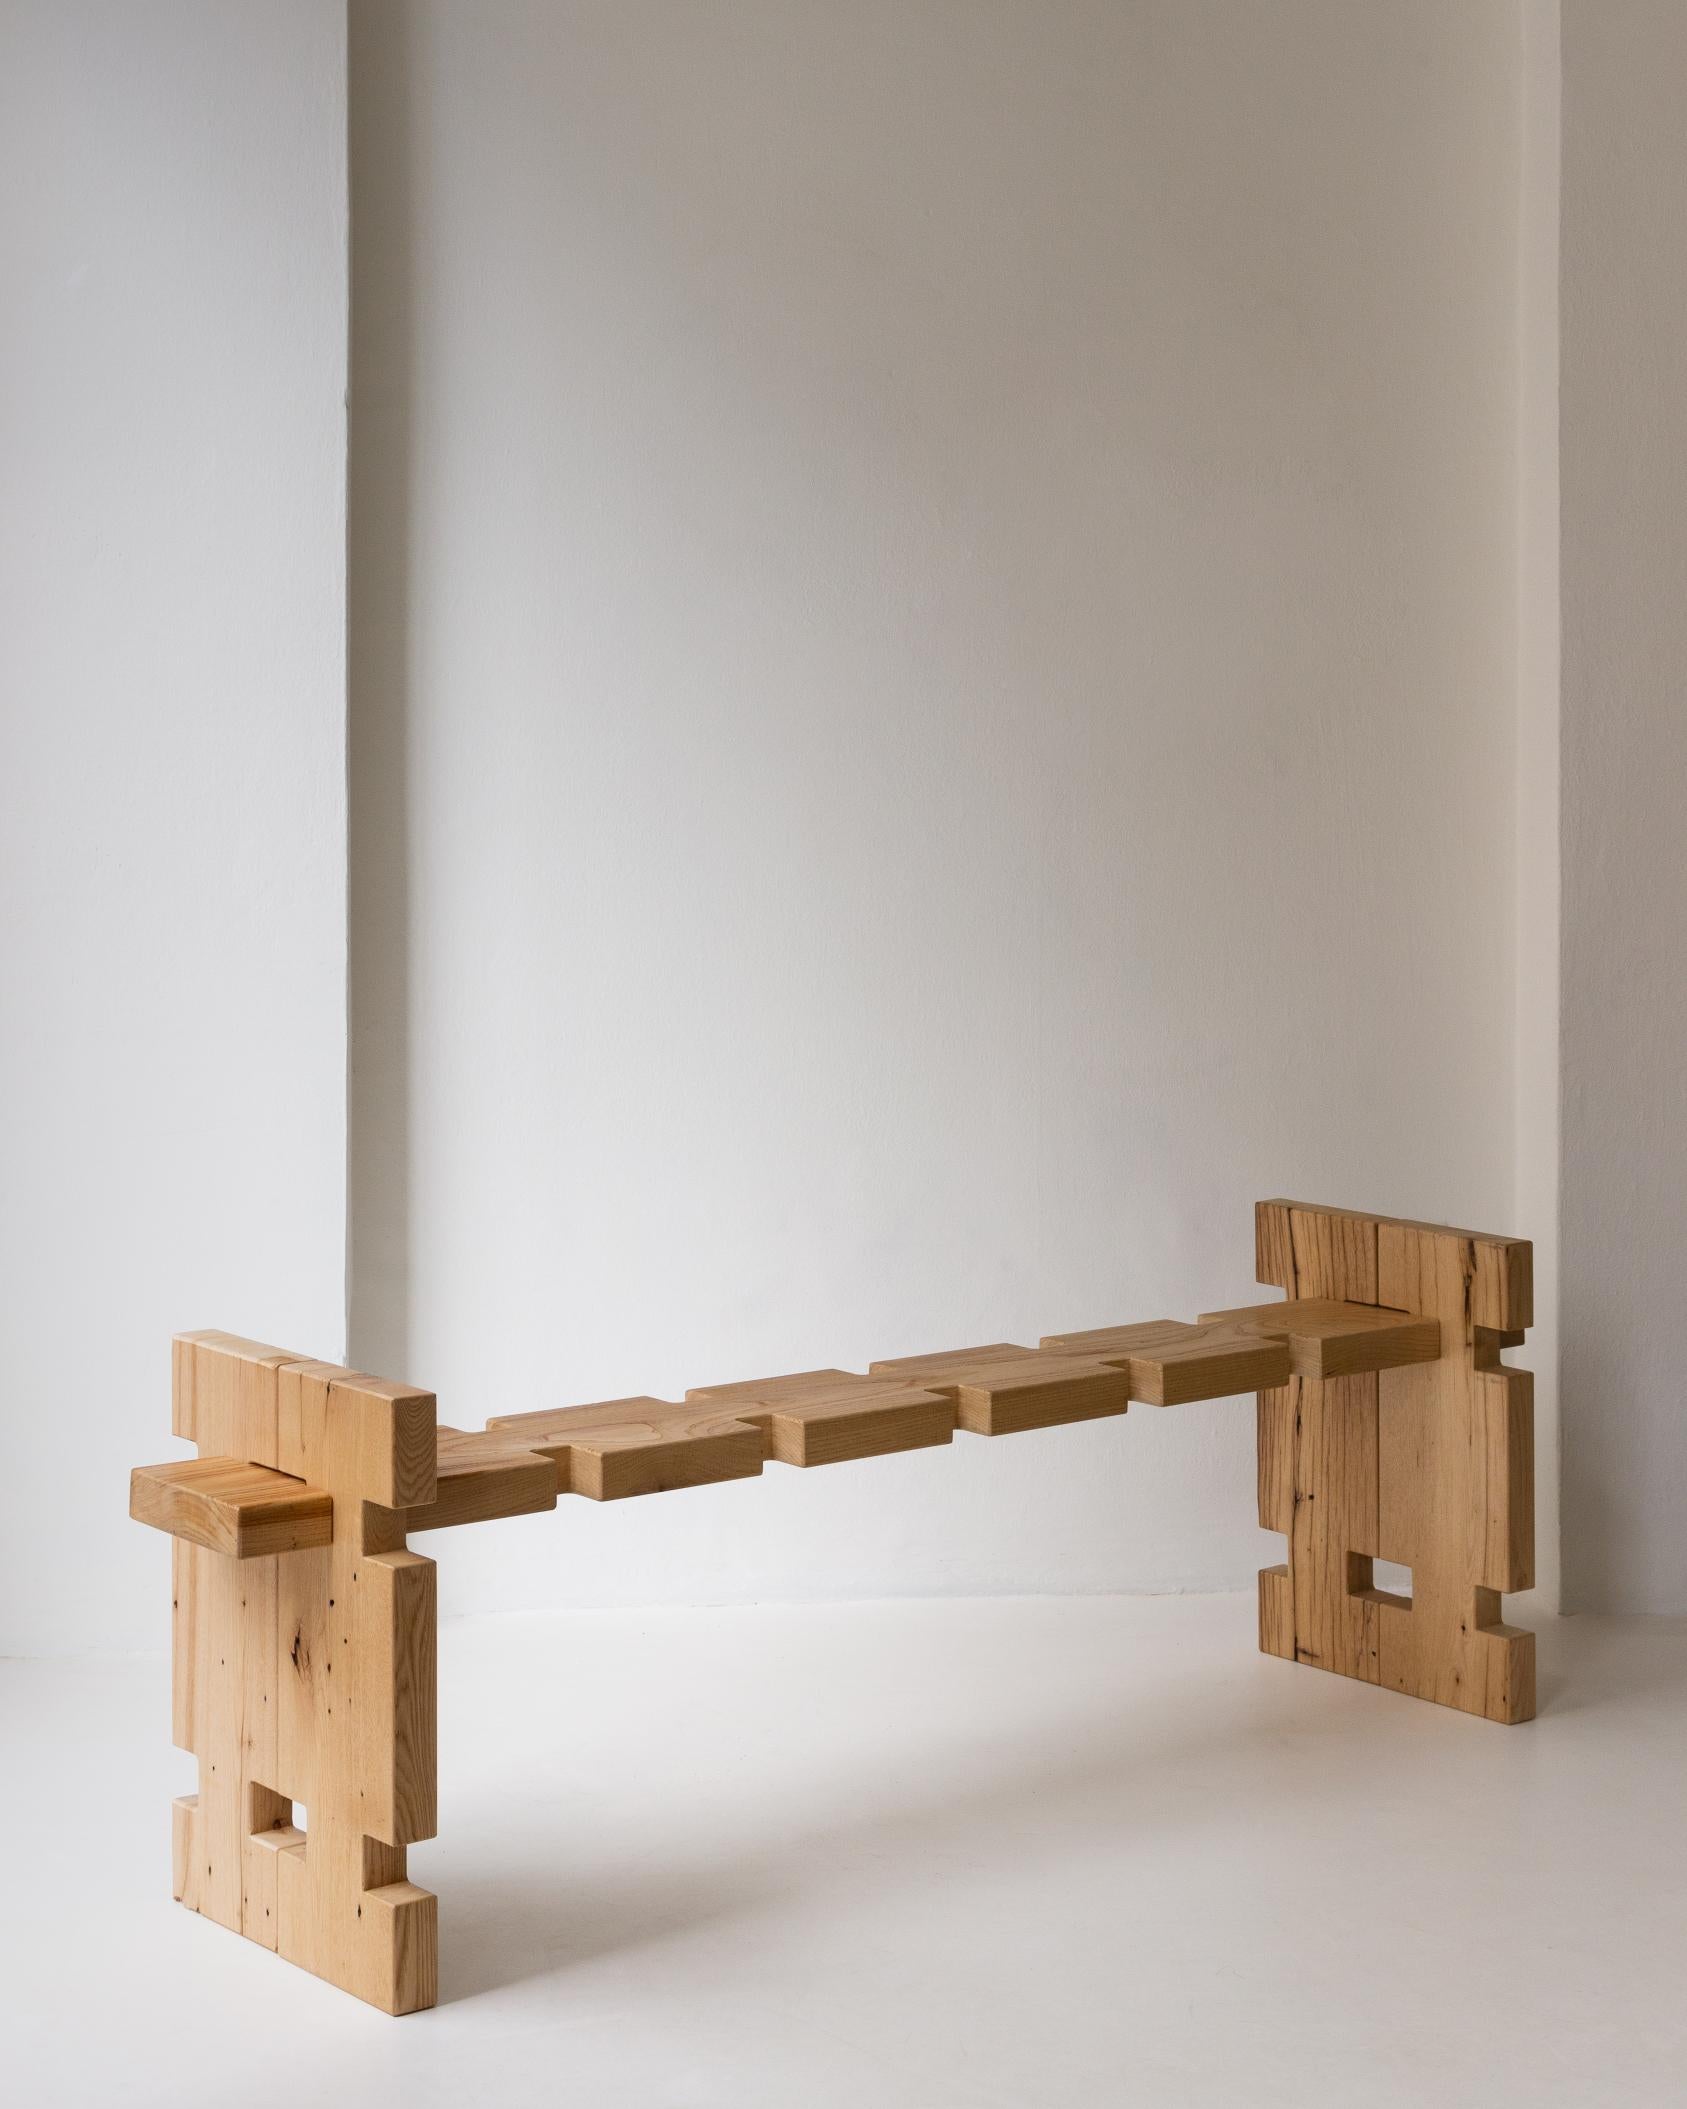 Element 3 Seater Bench by Nana Zaalishvili
Dimensions: W 175 x D 40 x H 55 cm
Materials: Century Old Oak

Made of solid Maple wood, this 3-seater bench ‘Museum’ is one of the pieces of the ‘Element’ collection influenced by the Georgian Oda house